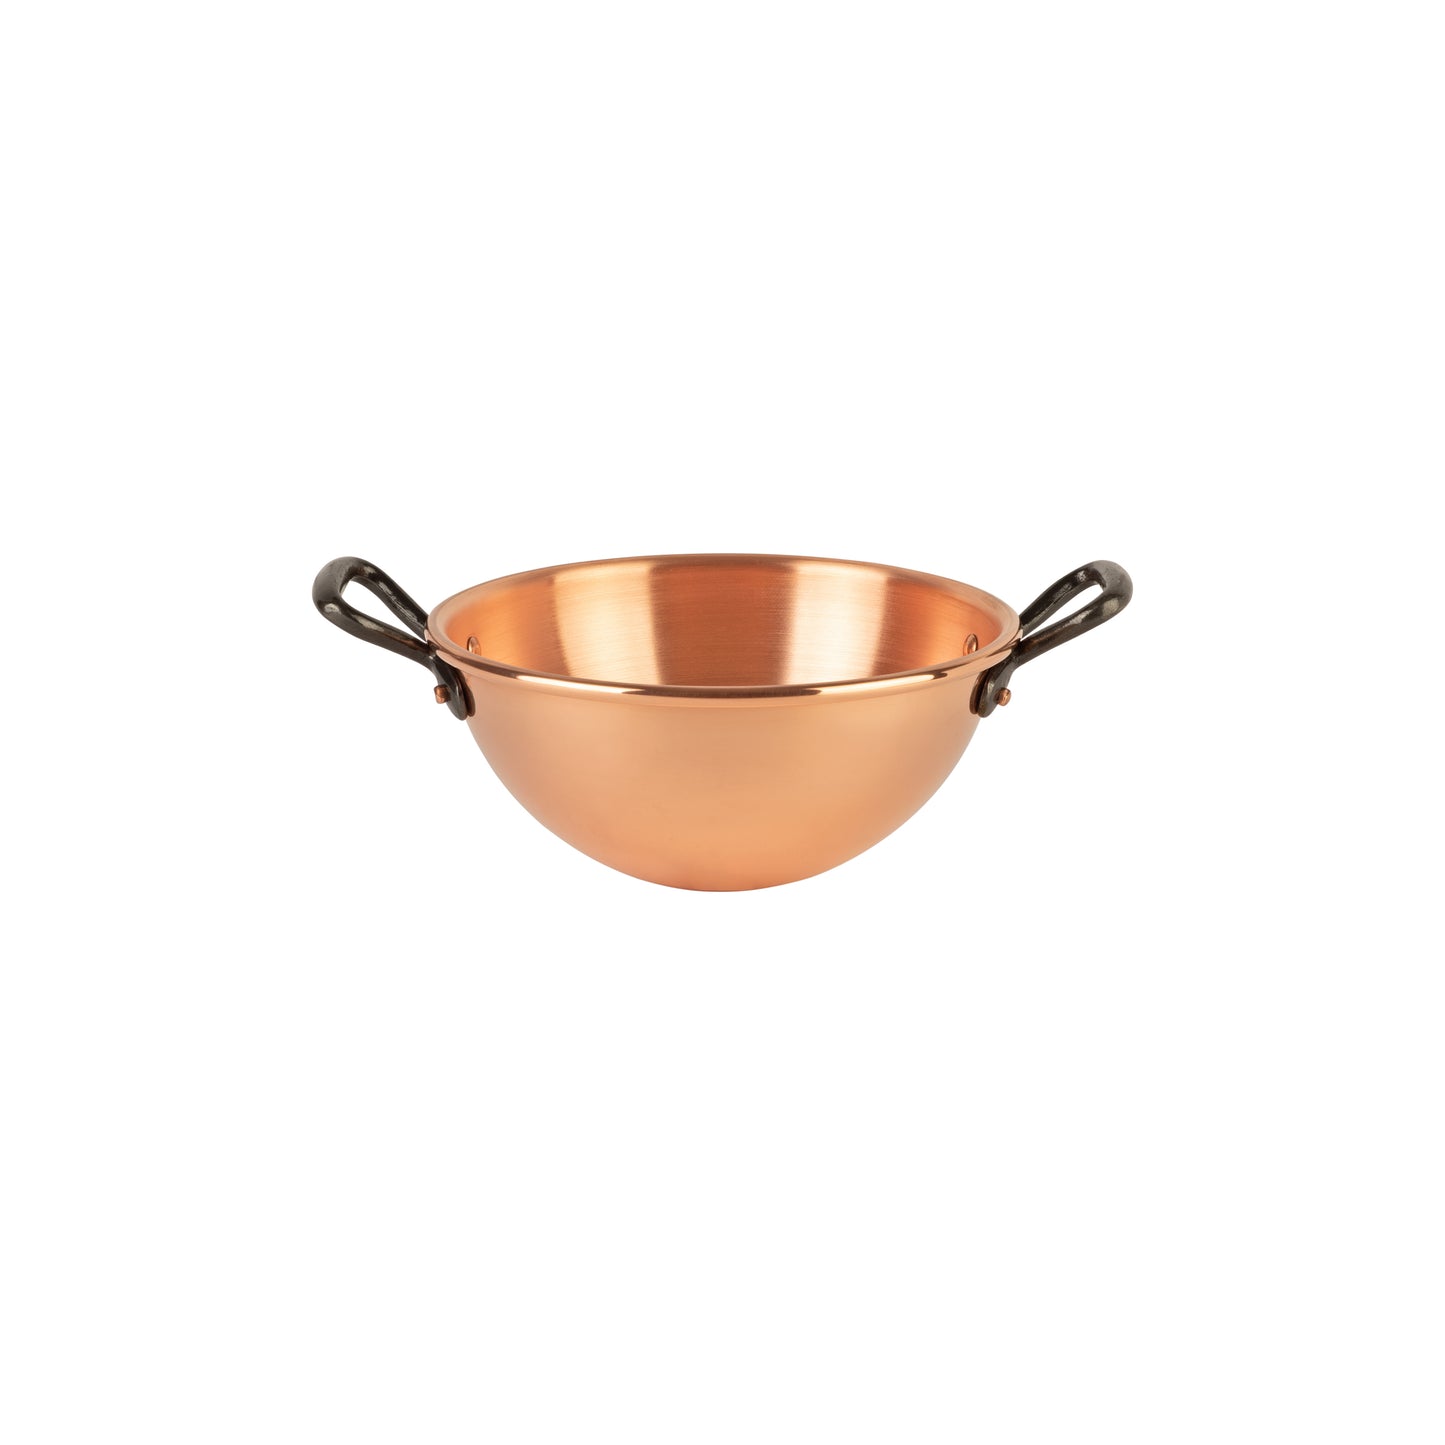 Pure copper whipping bowl, 1.5 qt